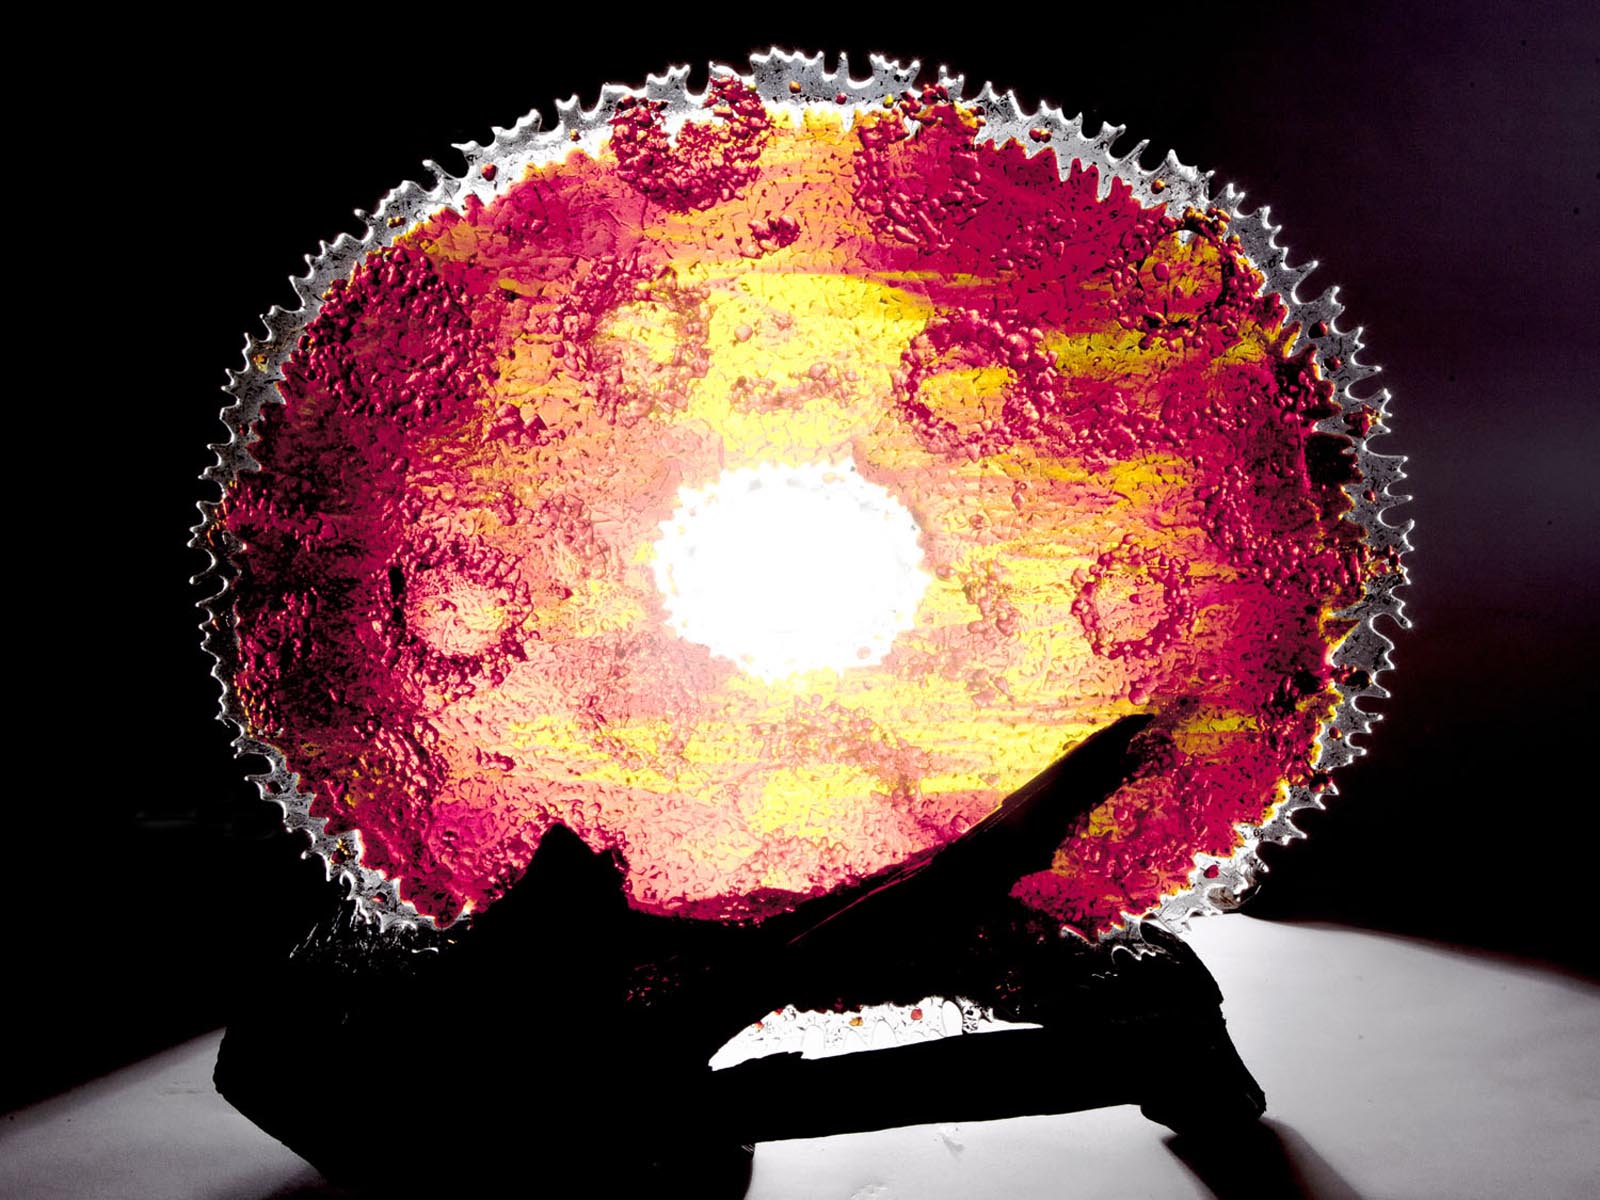 Glass sculpture entitled interpretation of the red dwarf star gliese 581 - contemporary glassware hand made in Ireland by Keith Sheppard Glass Artistry, Northern Ireland